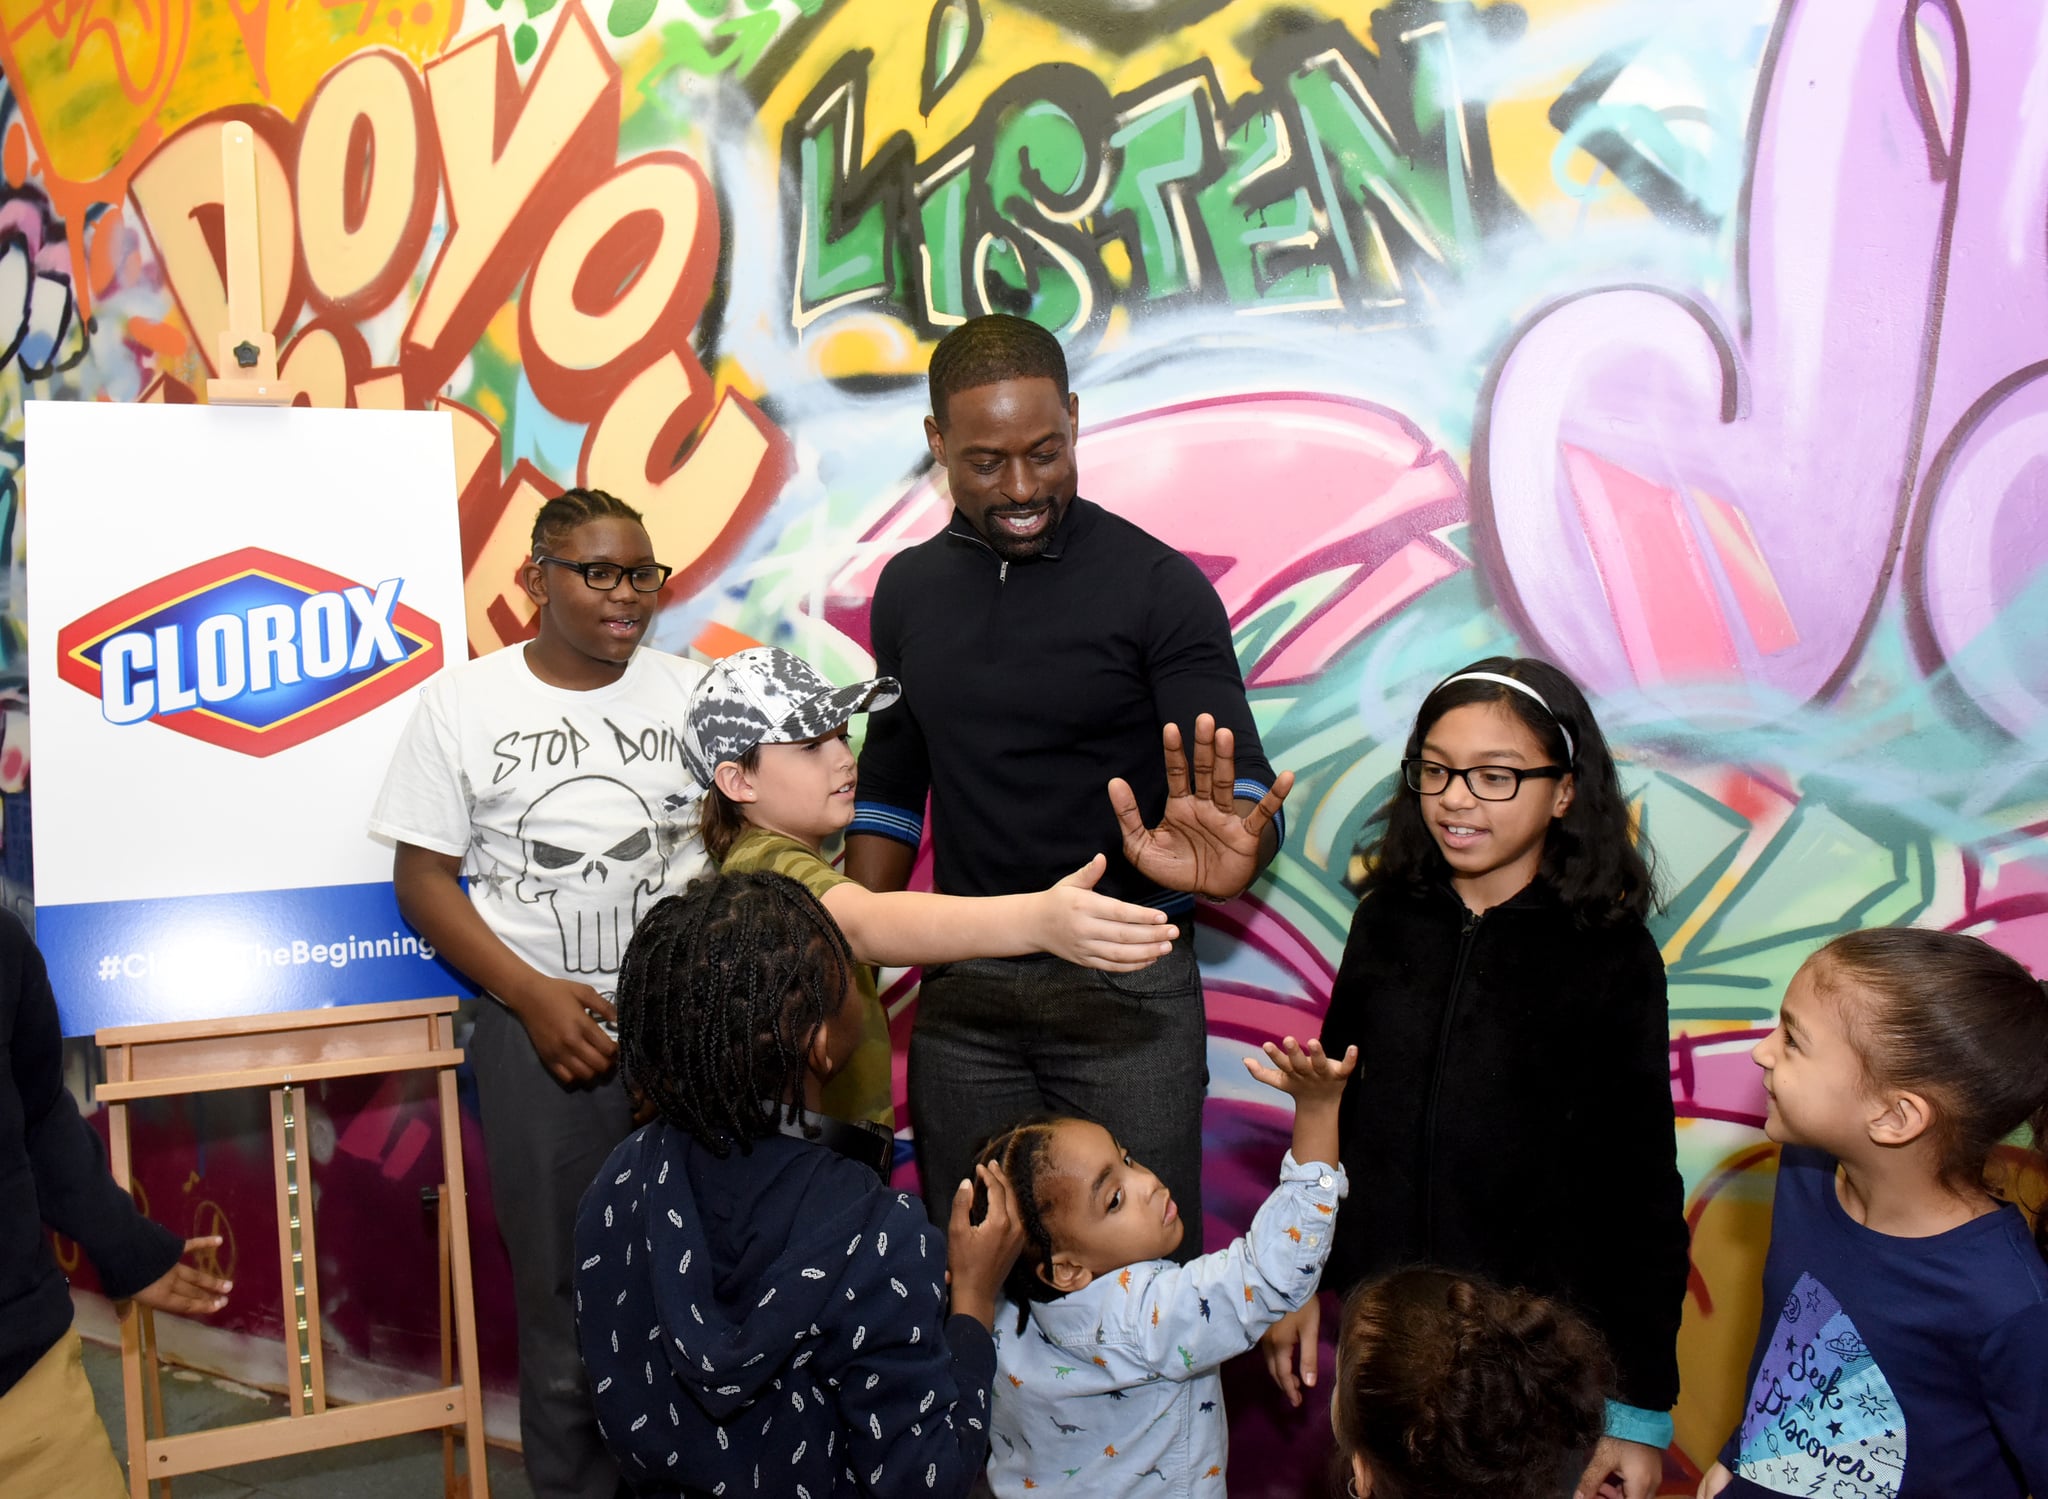 Award-winning actor Sterling K. Brown joins Clorox and Thrive Collective to celebrate the transformative power of clean at a new Youth Opportunity Hub in Harlem, New York, Tuesday, Feb. 27, 2018. The space was cleaned with a grant from Clorox and the help of 250 community volunteers to create new possibilities for youth as an arts hub and mentoring center. (Photo by Diane Bondareff/Invision for Clorox/AP Images)